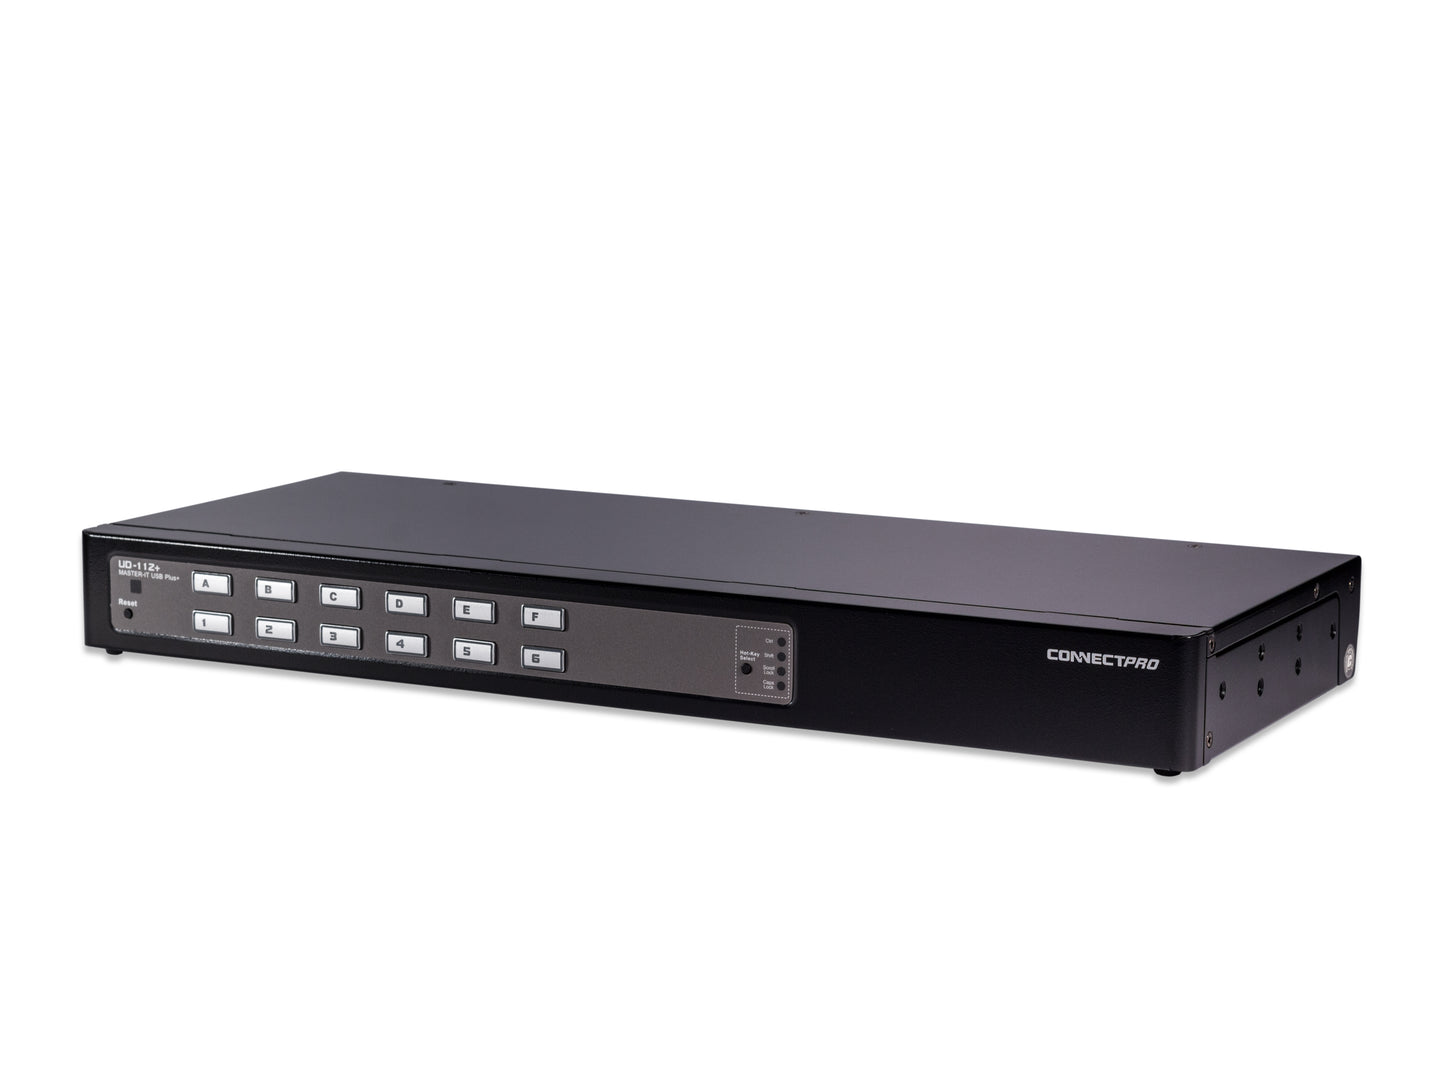 UD-112+ DVI-D KVM switch for 1 Monitor and 12 Computers